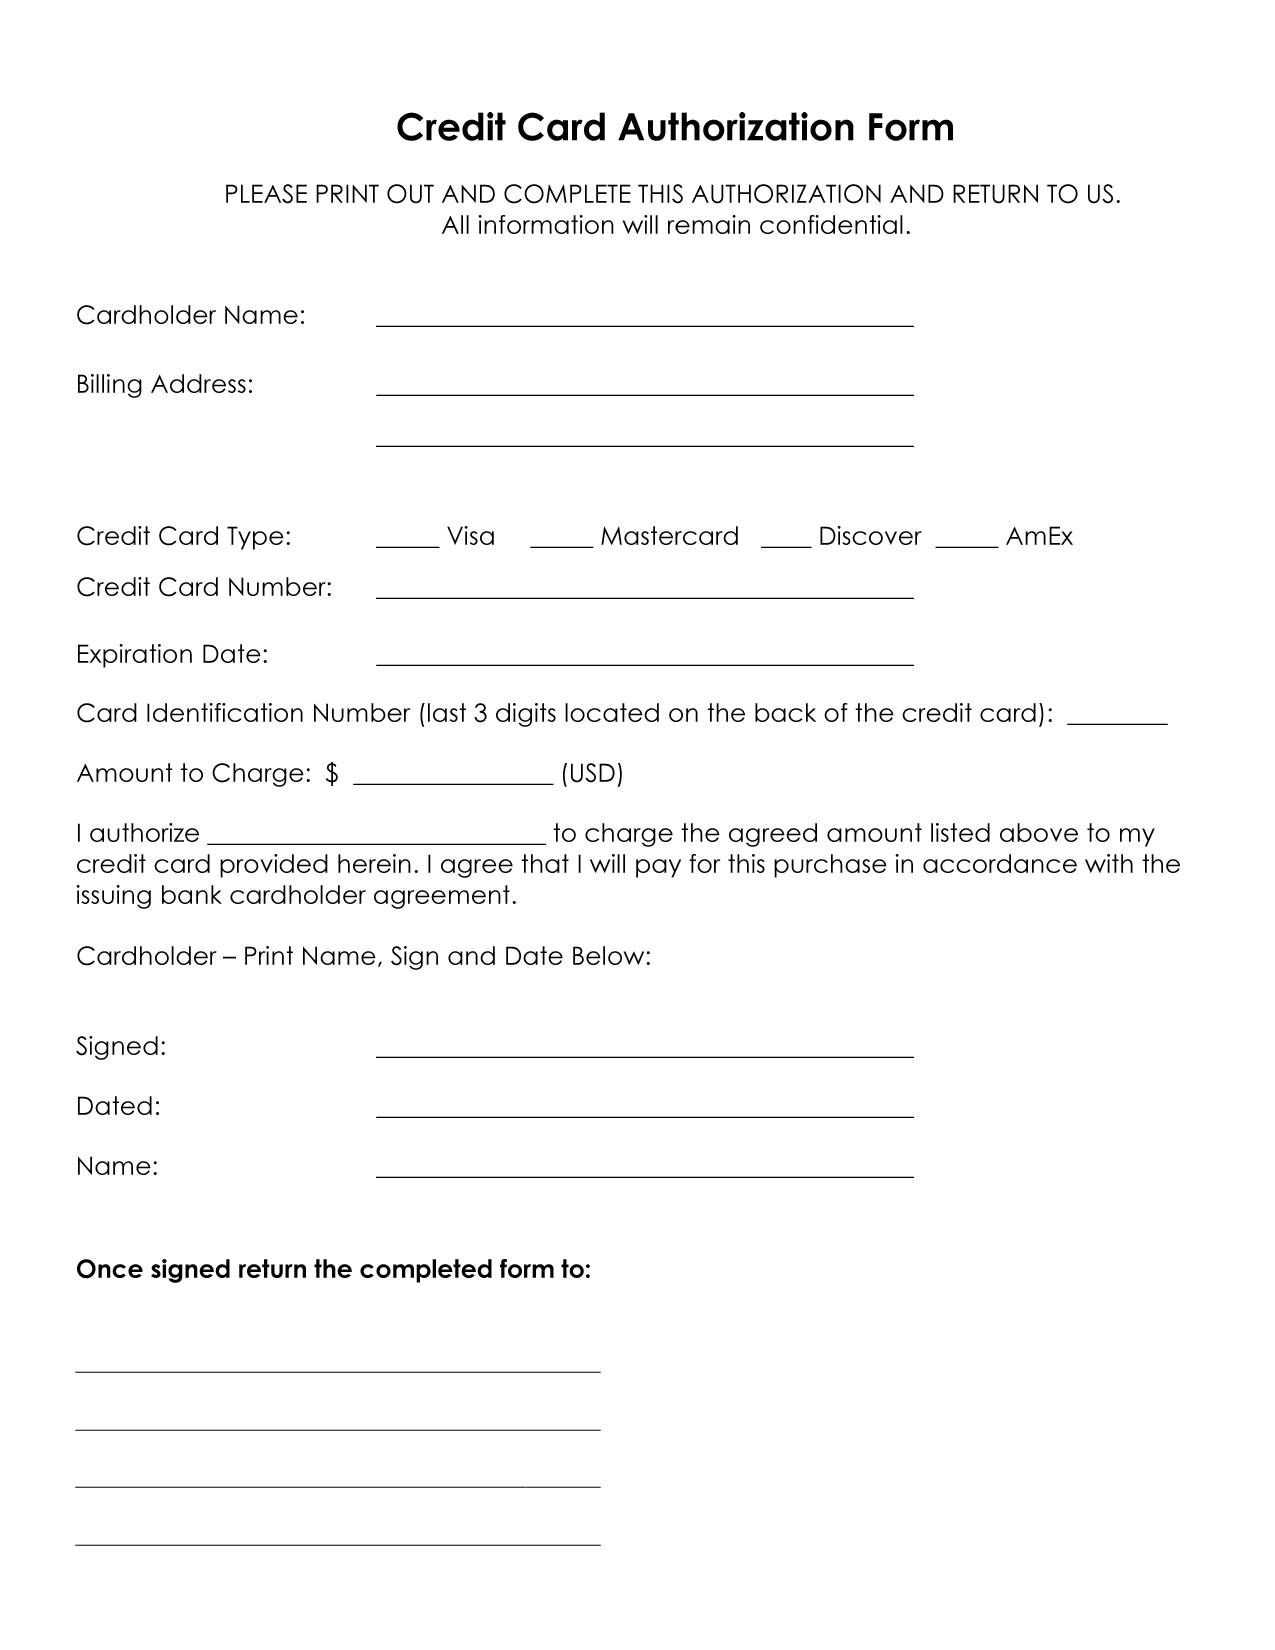 Credit Card Authorization Form Template | Credit Card Within Corporate Credit Card Agreement Template